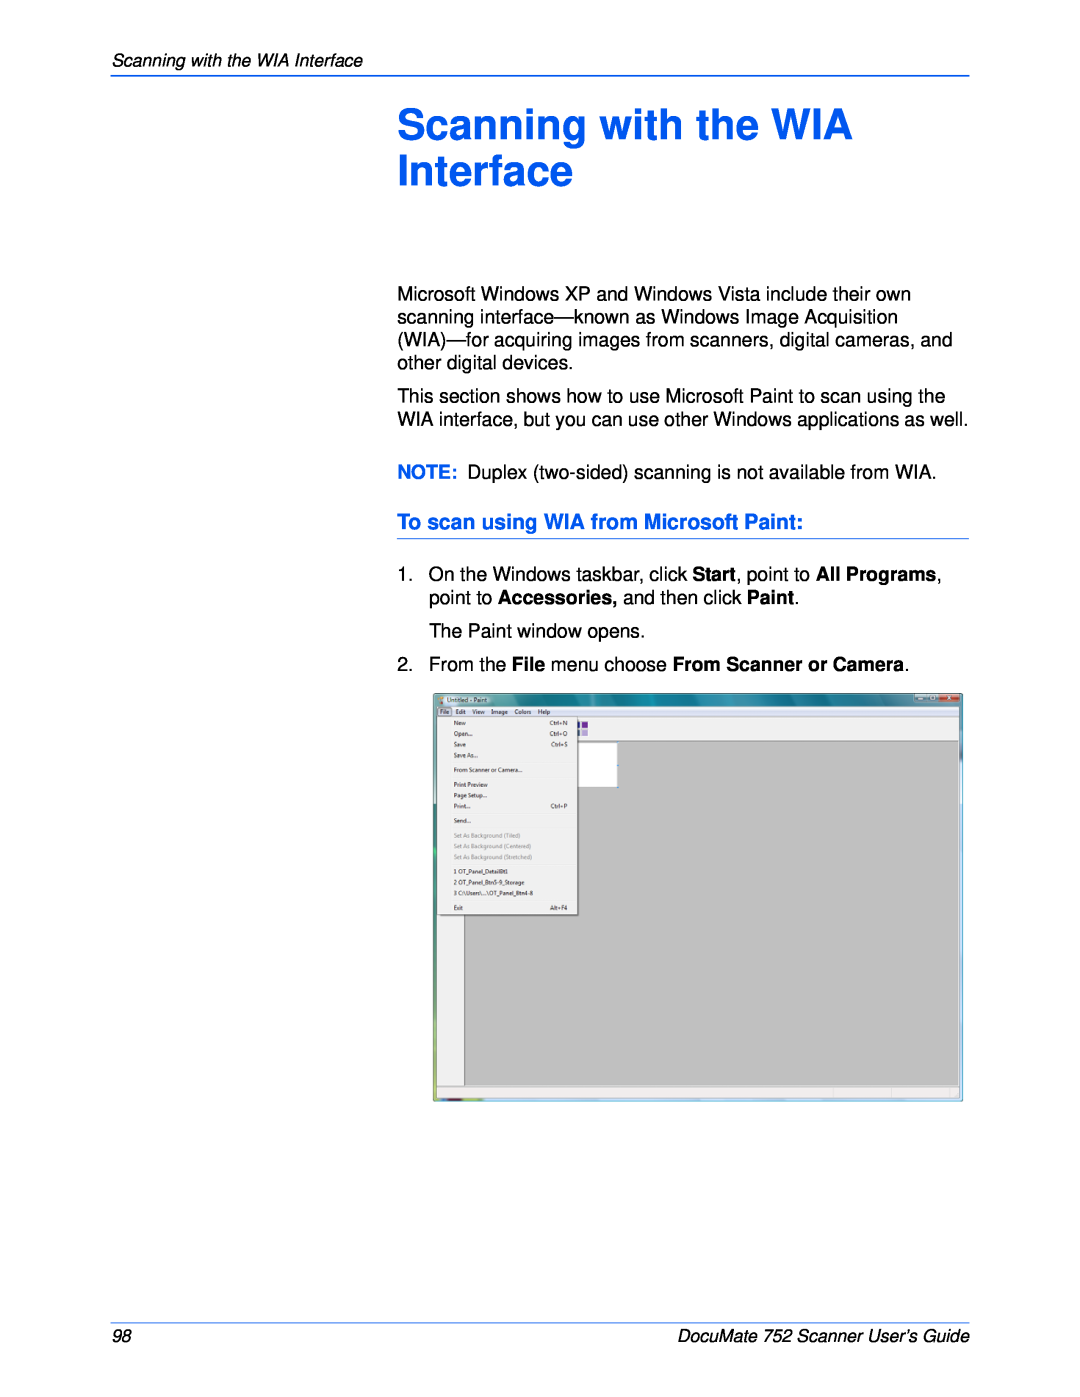 Xerox 752 manual Scanning with the WIA Interface, To scan using WIA from Microsoft Paint 